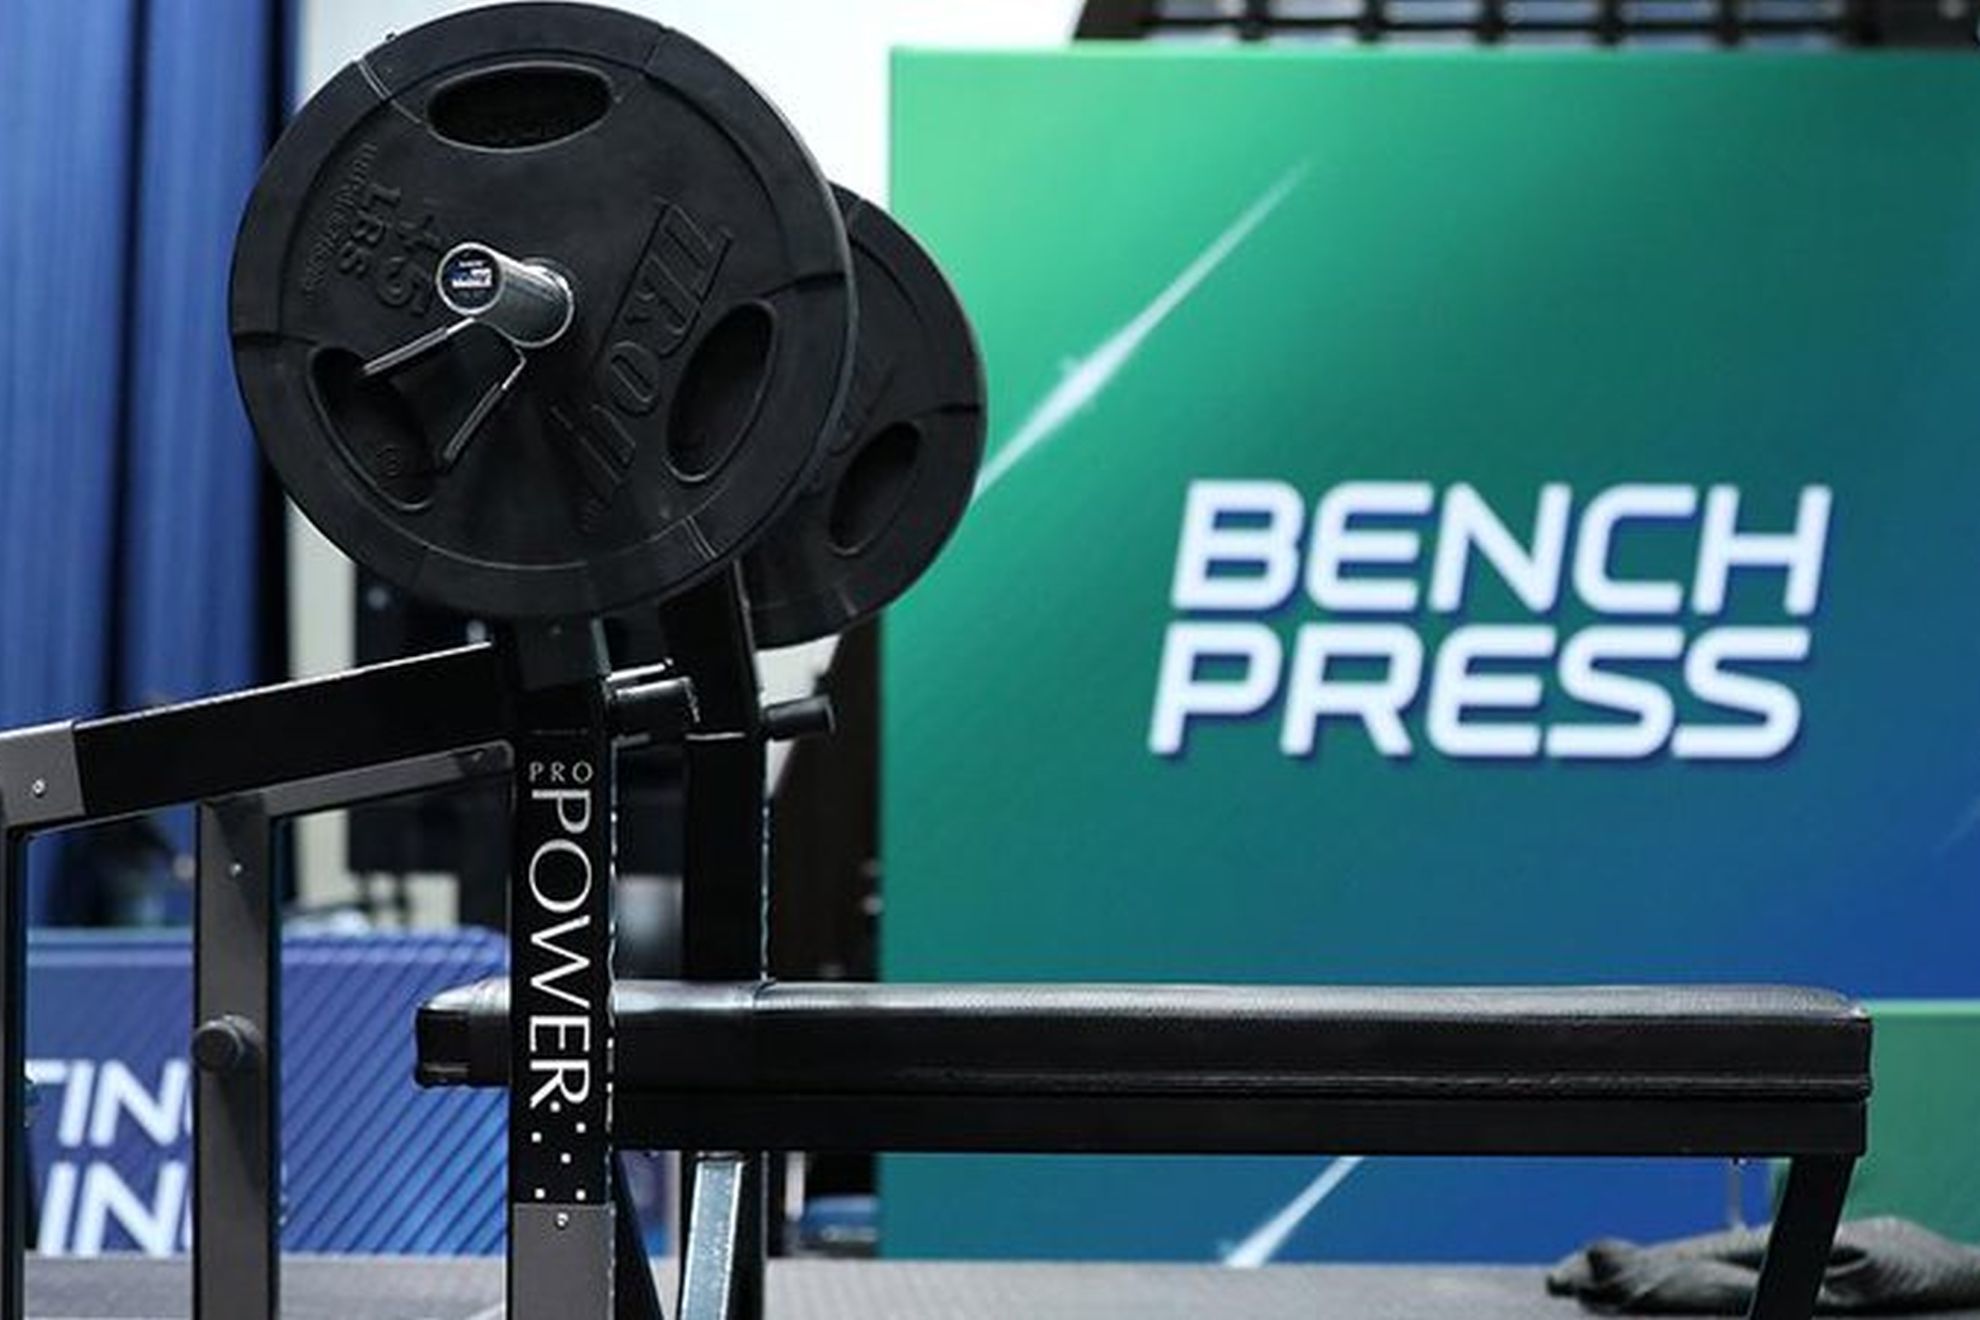 NFL Combine Tests: What tests are done at the NFL Combine?